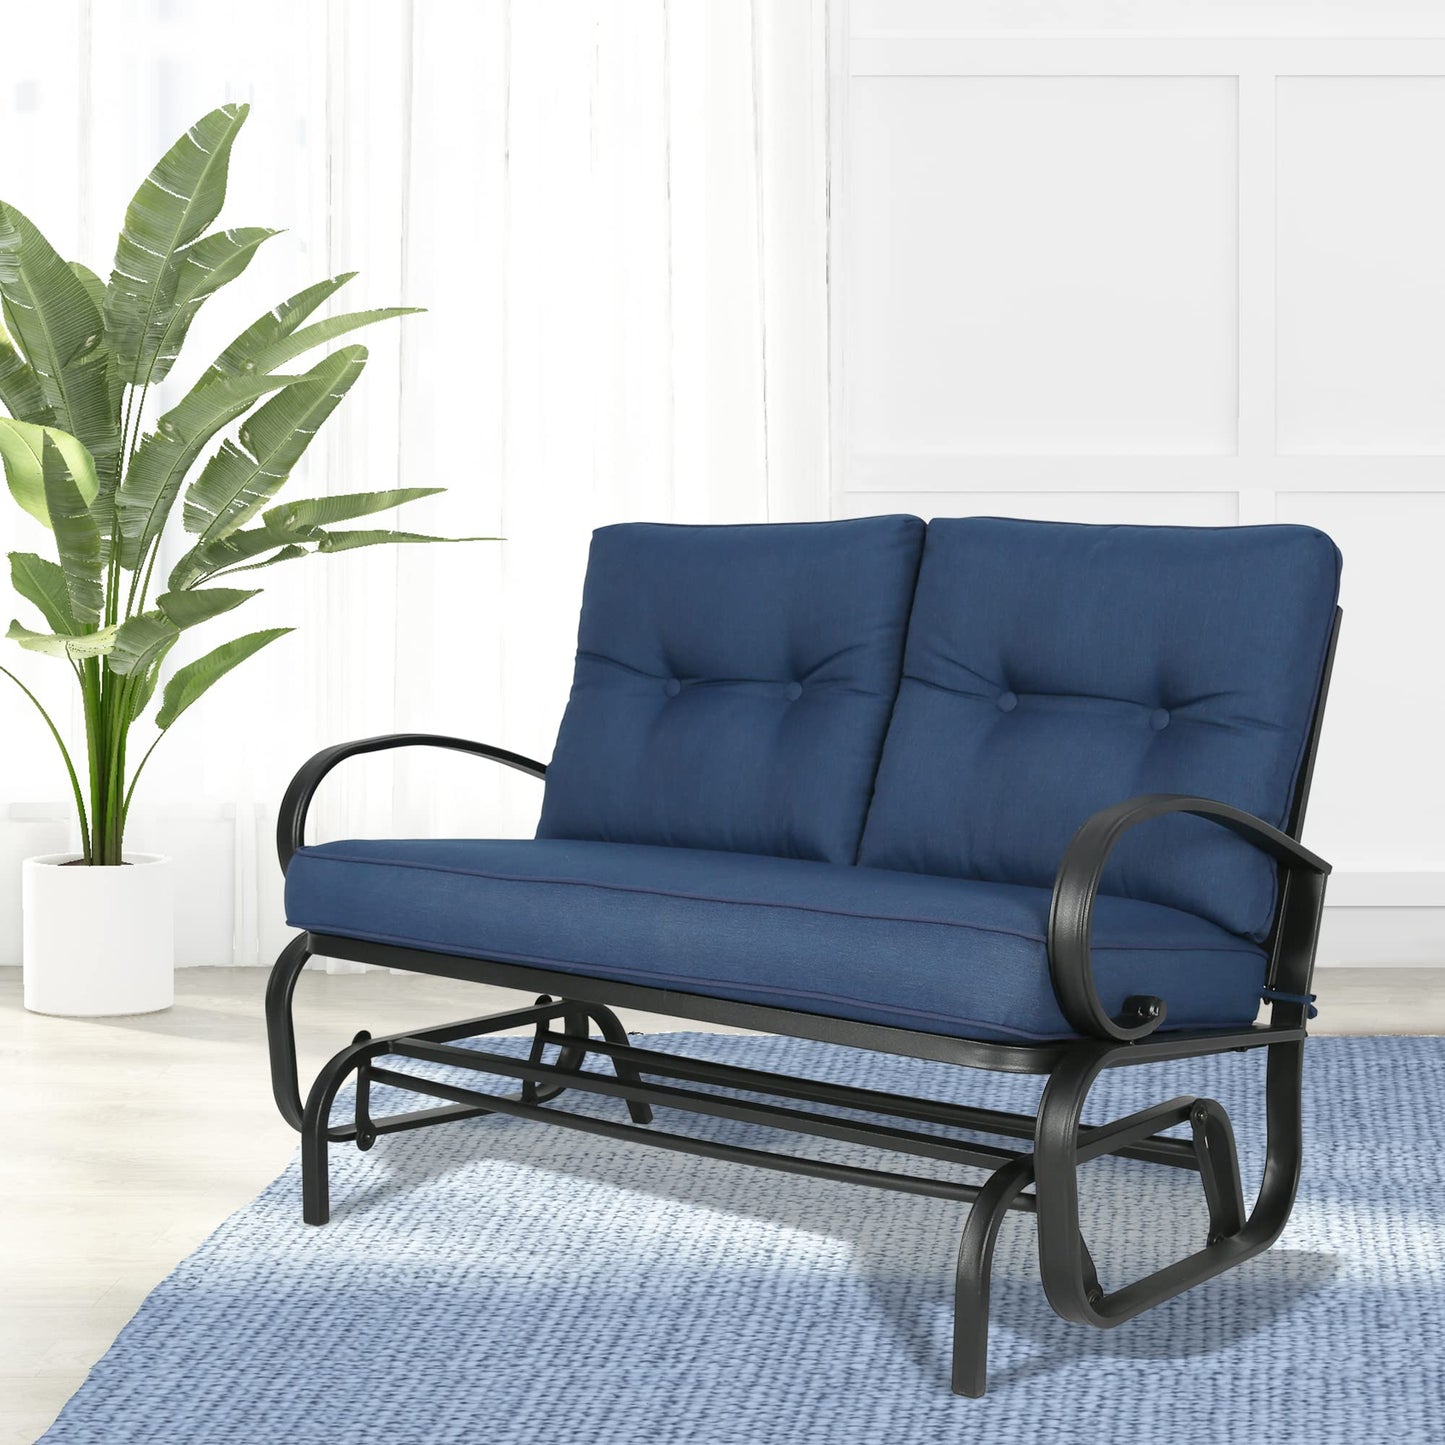 Patio Glider Bench Loveseat Outdoor Cushioed 2 Person Rocking Seating Patio Swing Chair, Navy